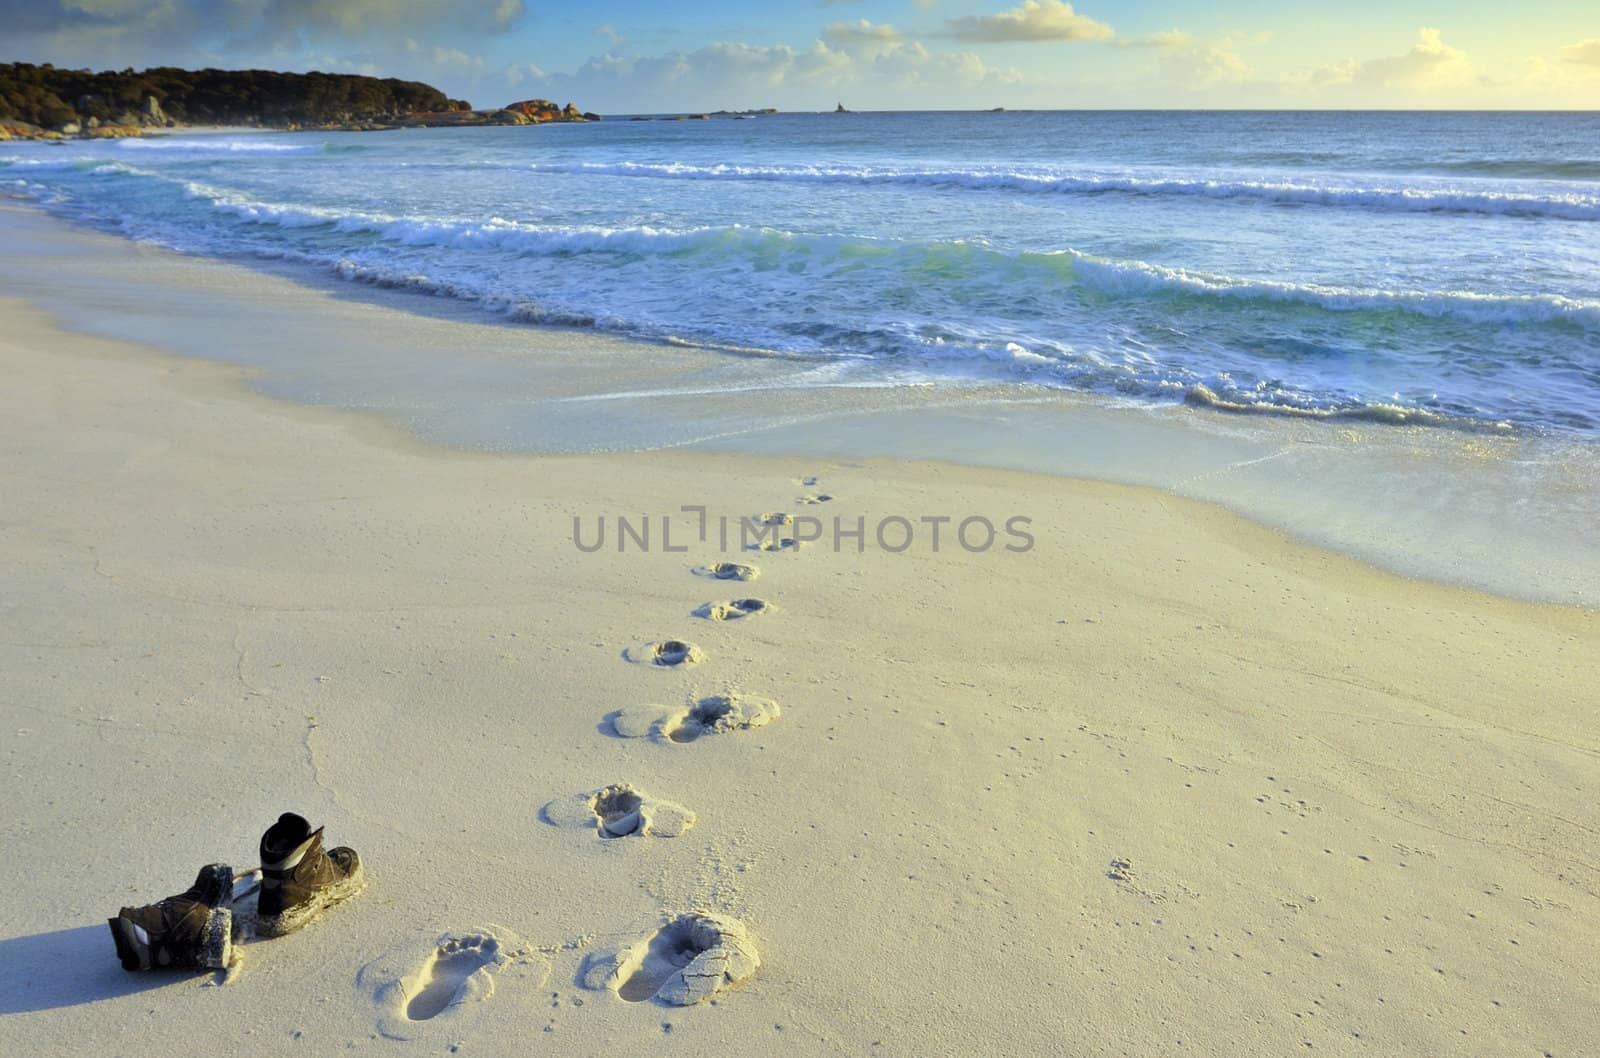 Boots left on the beach by Bateleur